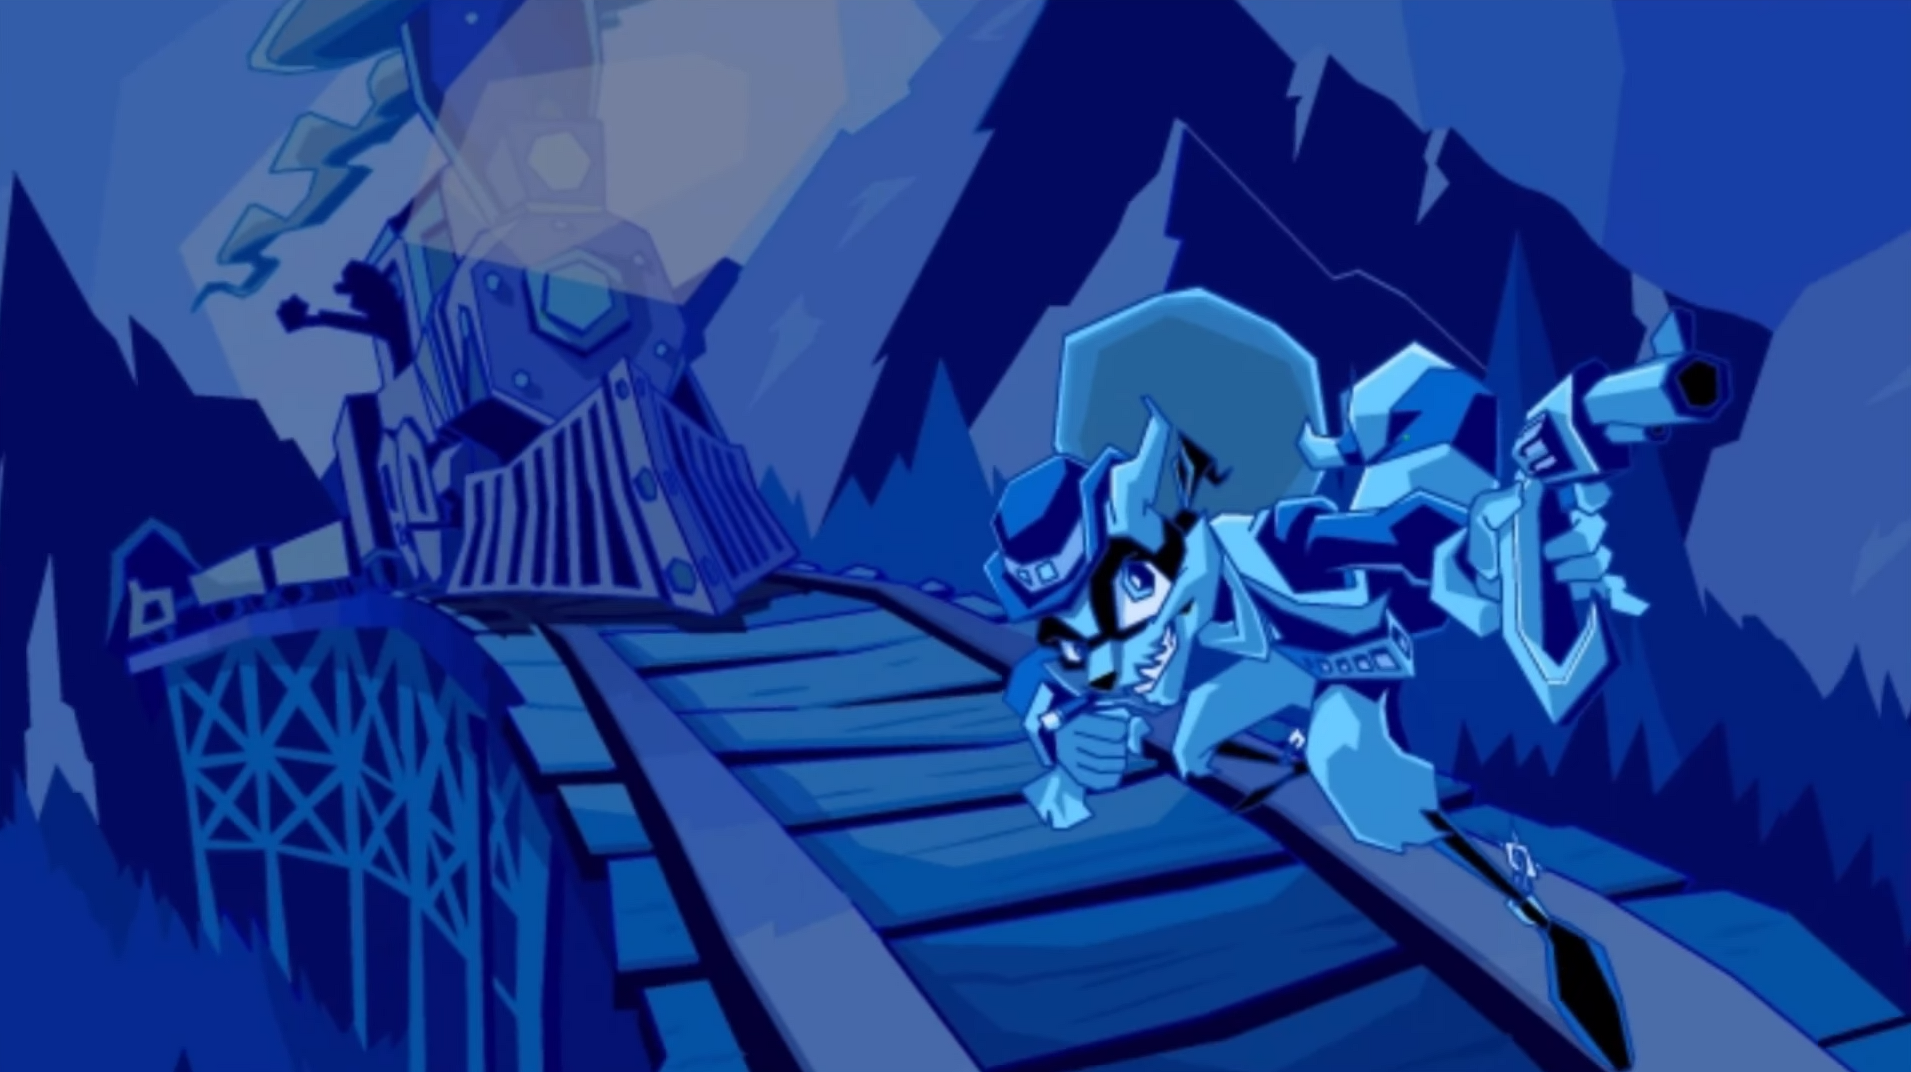 Tennessee Kid Cooper, Sly Cooper Wiki